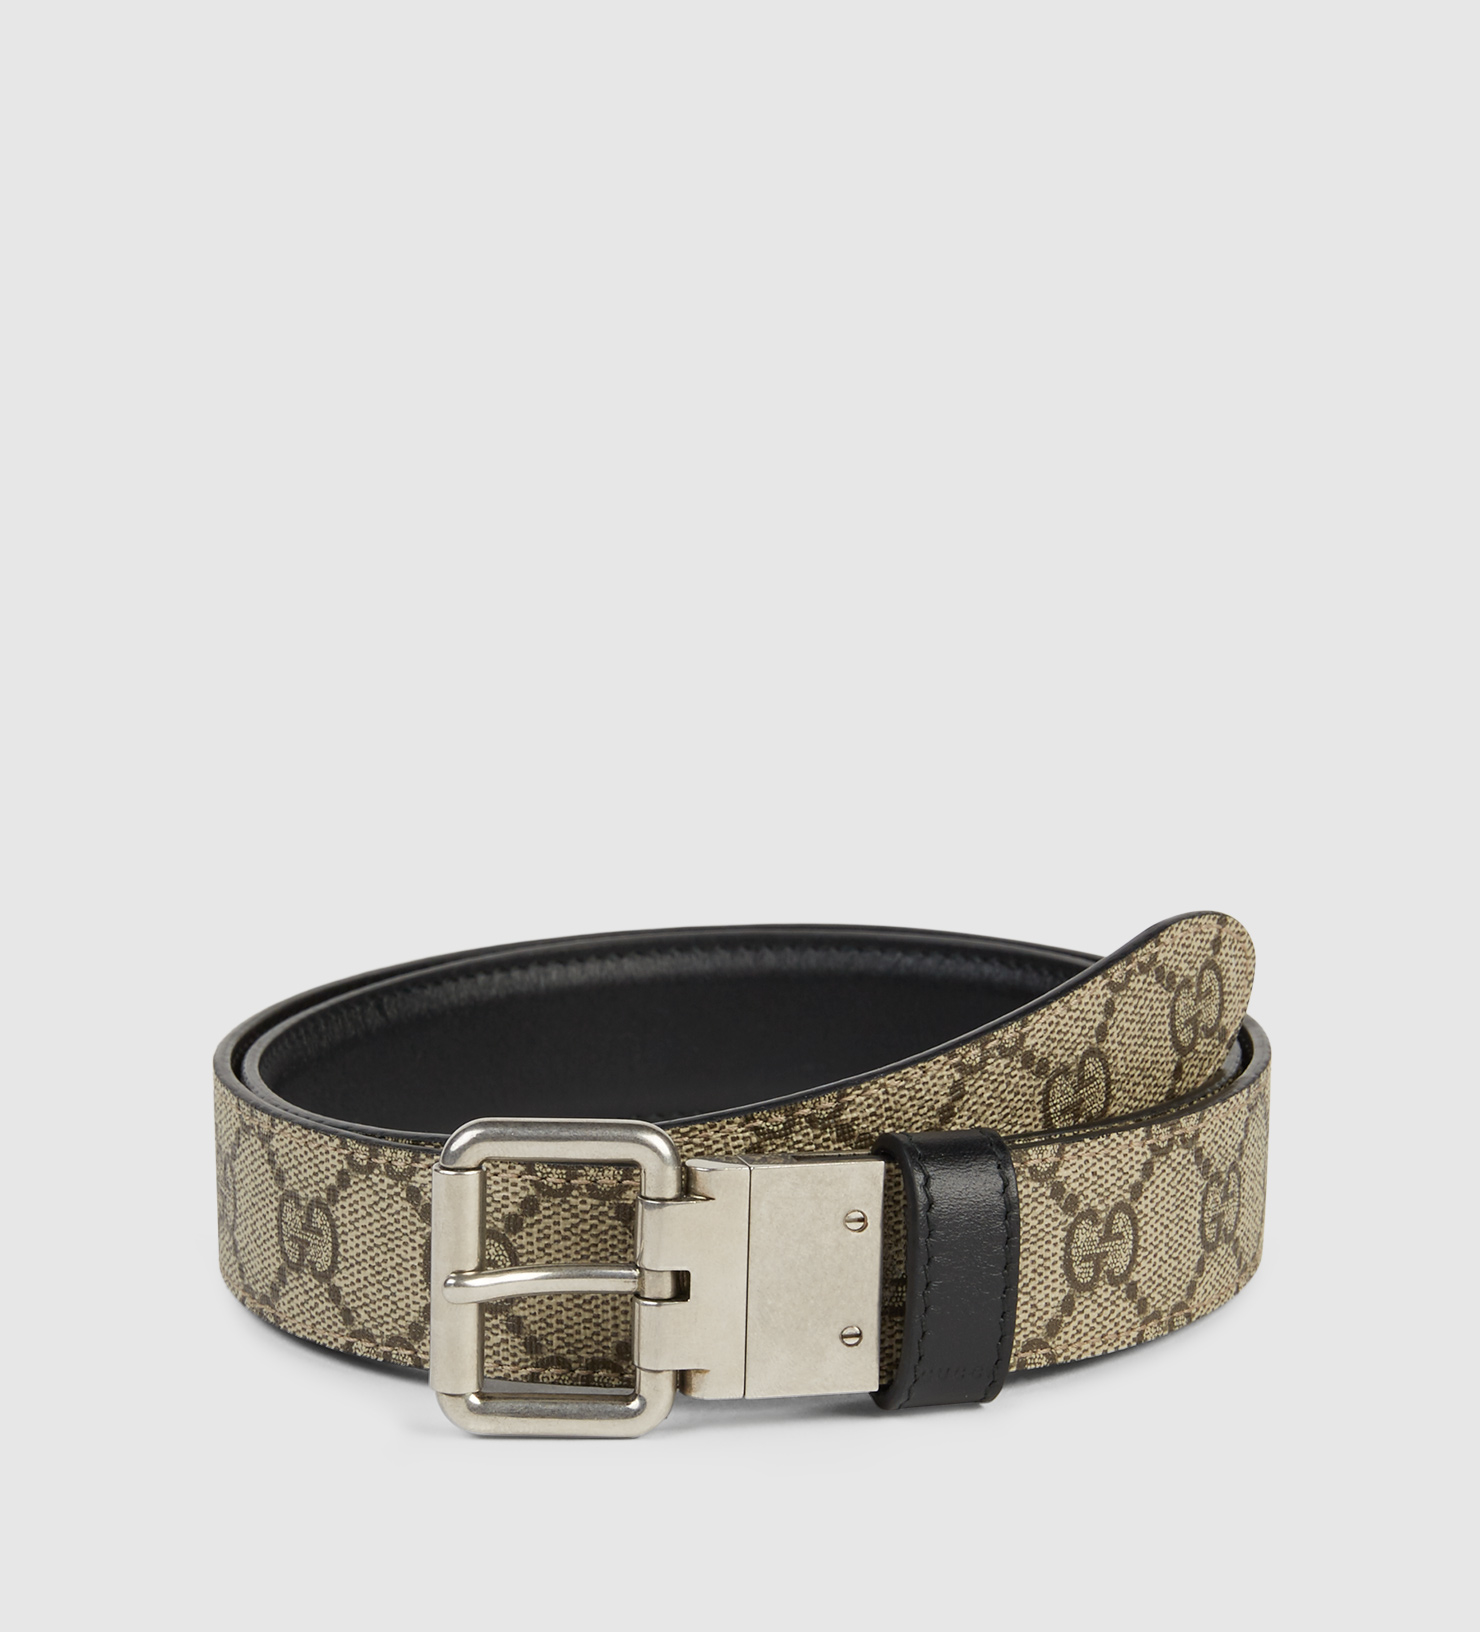 Gucci Reversible Leather And Gg Supreme Belt in Black for Men - Lyst